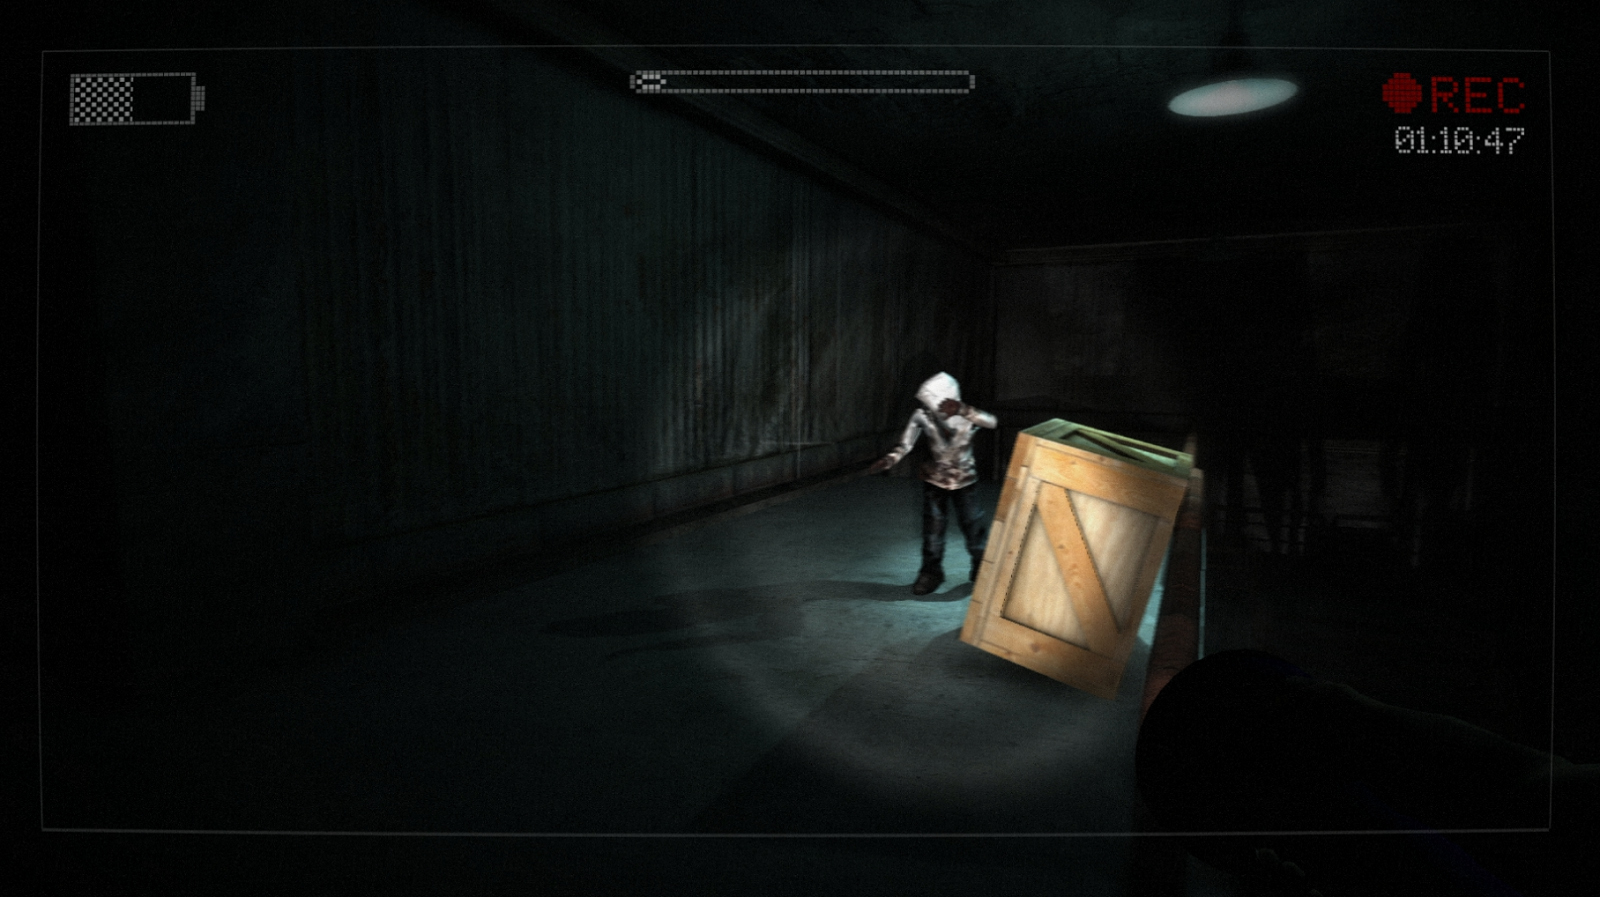 Save 85% on Slender: The Arrival on Steam